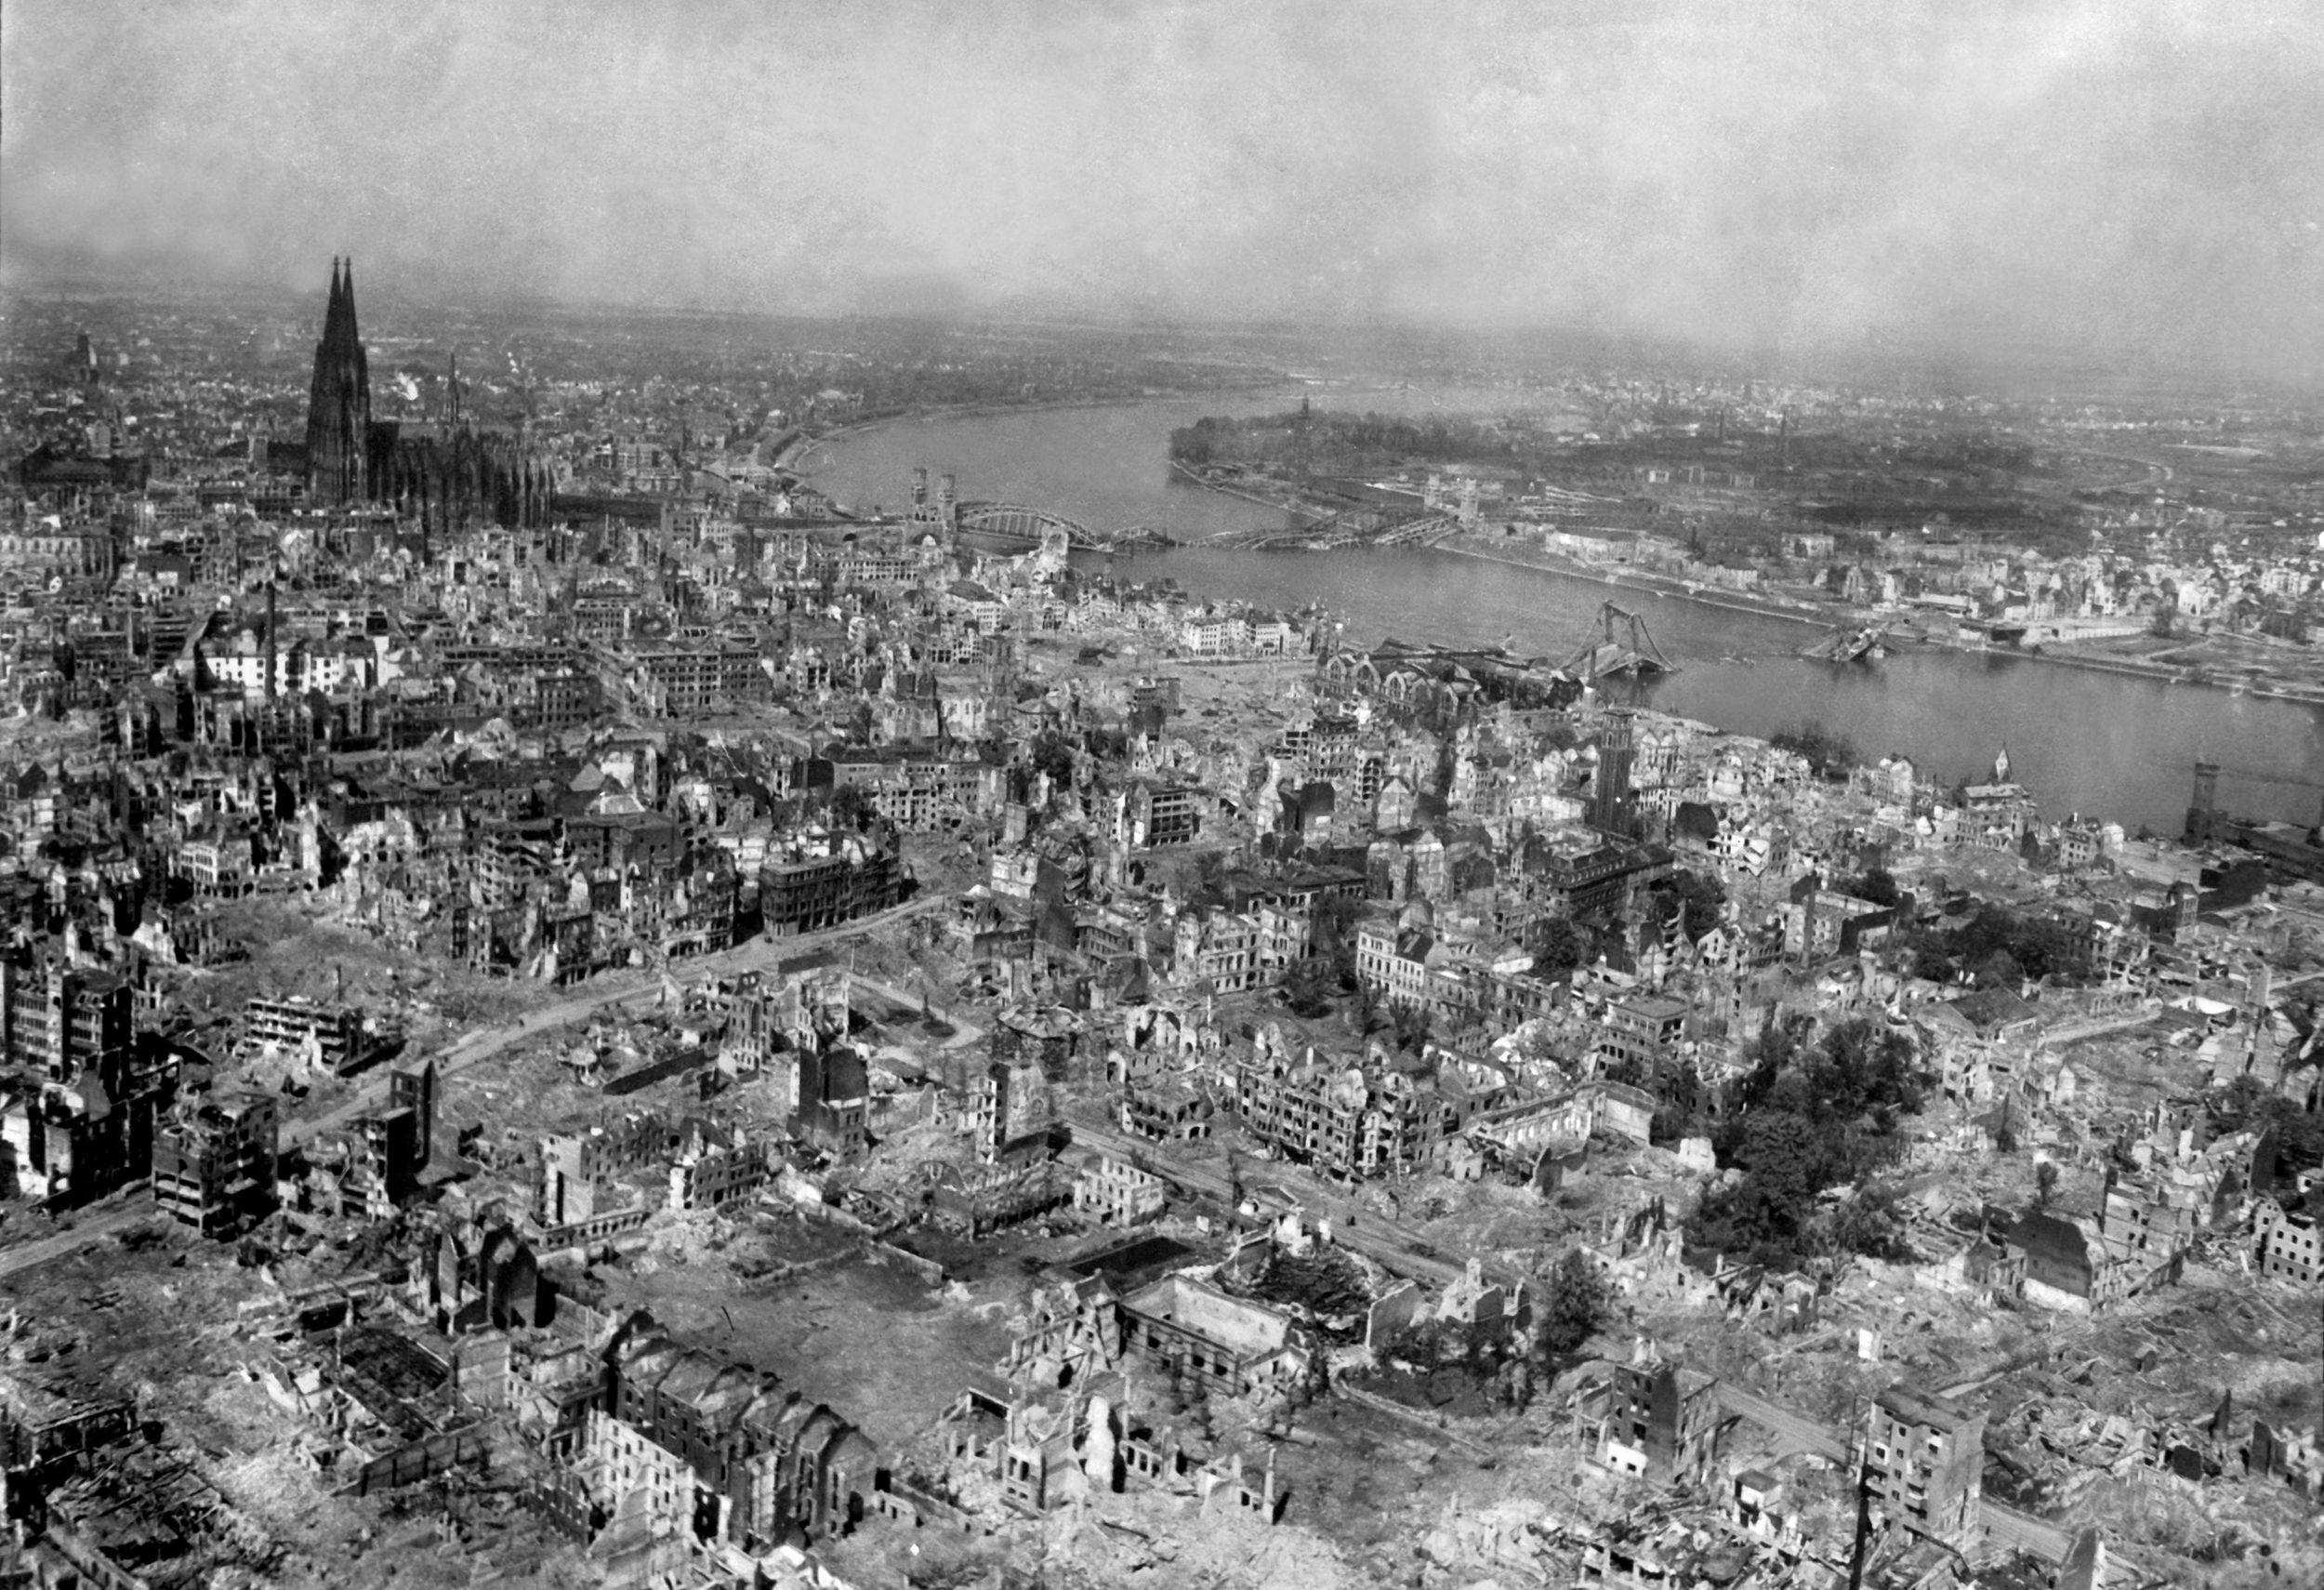 The devastation wrought against the city of Cologne, Germany, was starkly visible on the day after the historic RAF 1,000-plane raid of May 30, 1942. The extent of the destruction was appalling, and it shocked the German High Command and even Hitler himself, who just a day earlier had dismissed the RAF as little threat to the Third Reich.